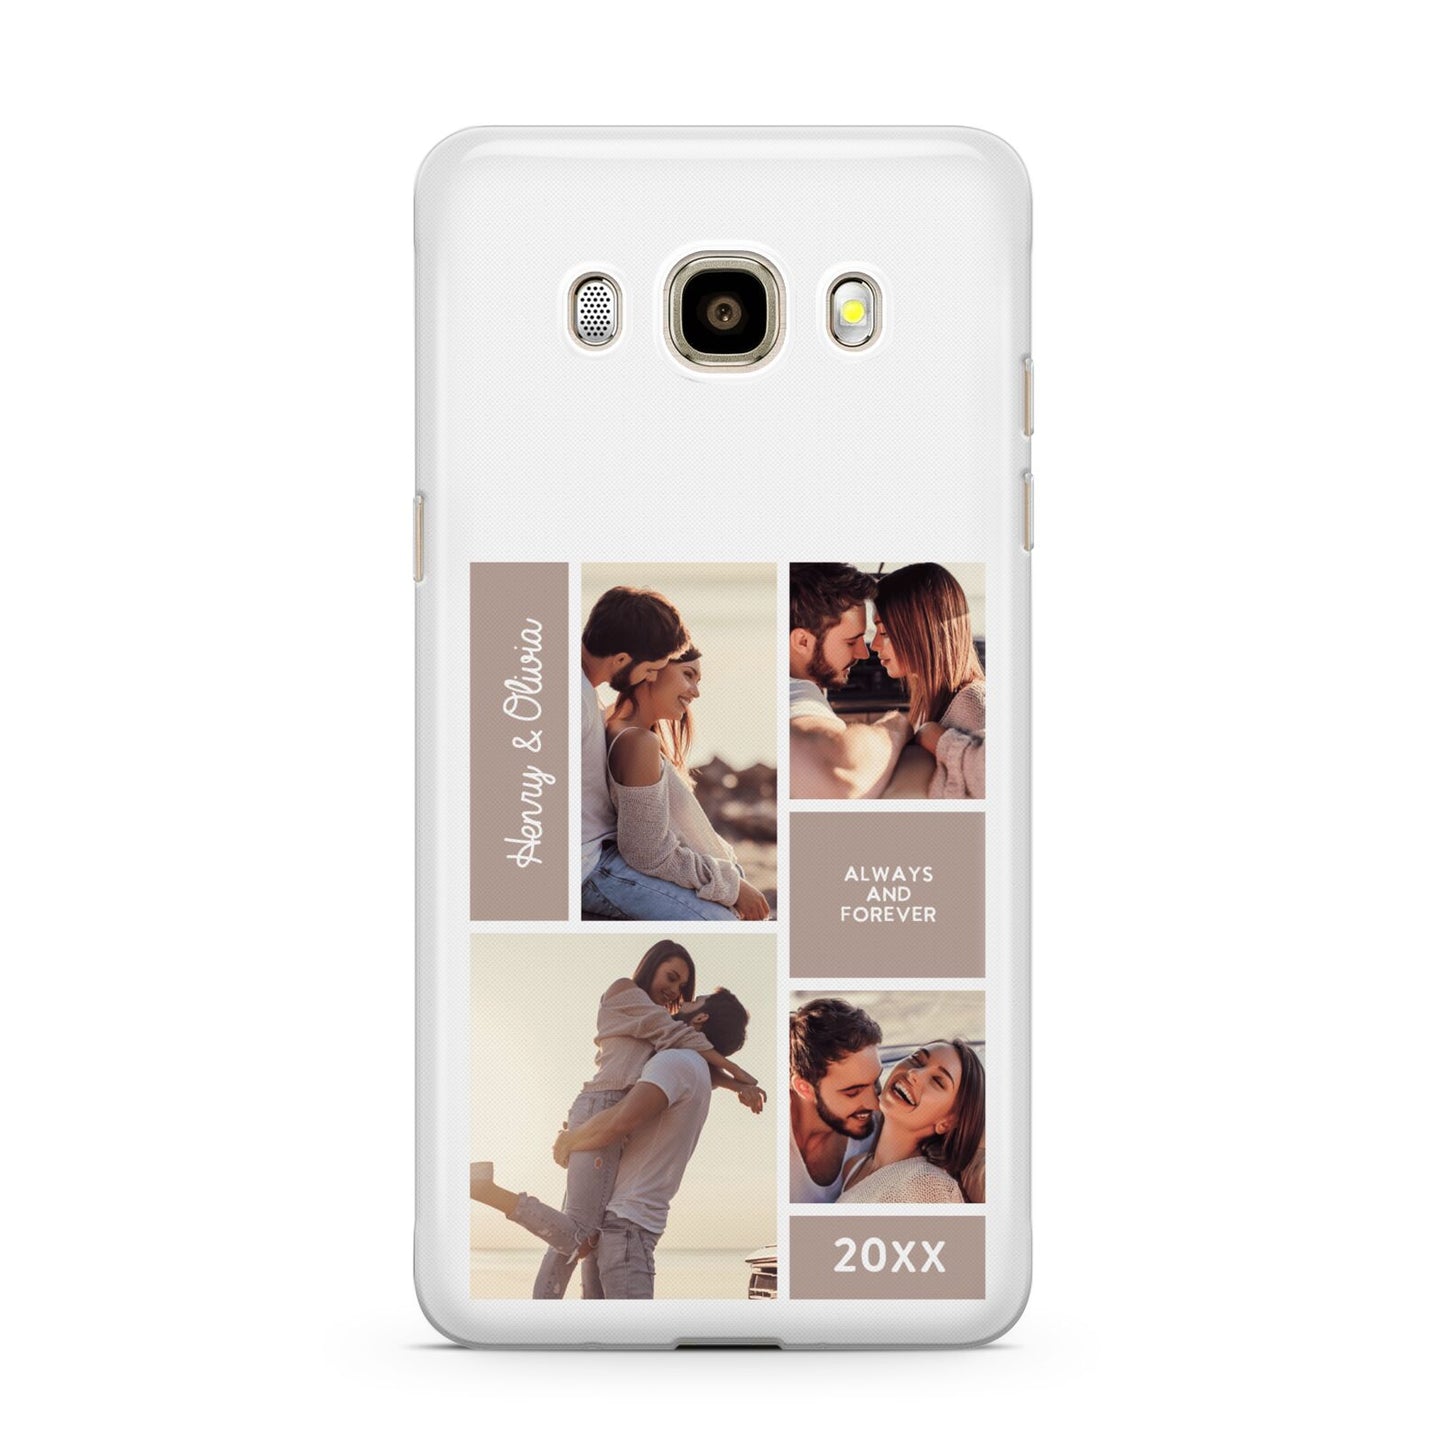 Couples Valentine Photo Collage Personalised Samsung Galaxy J7 2016 Case on gold phone